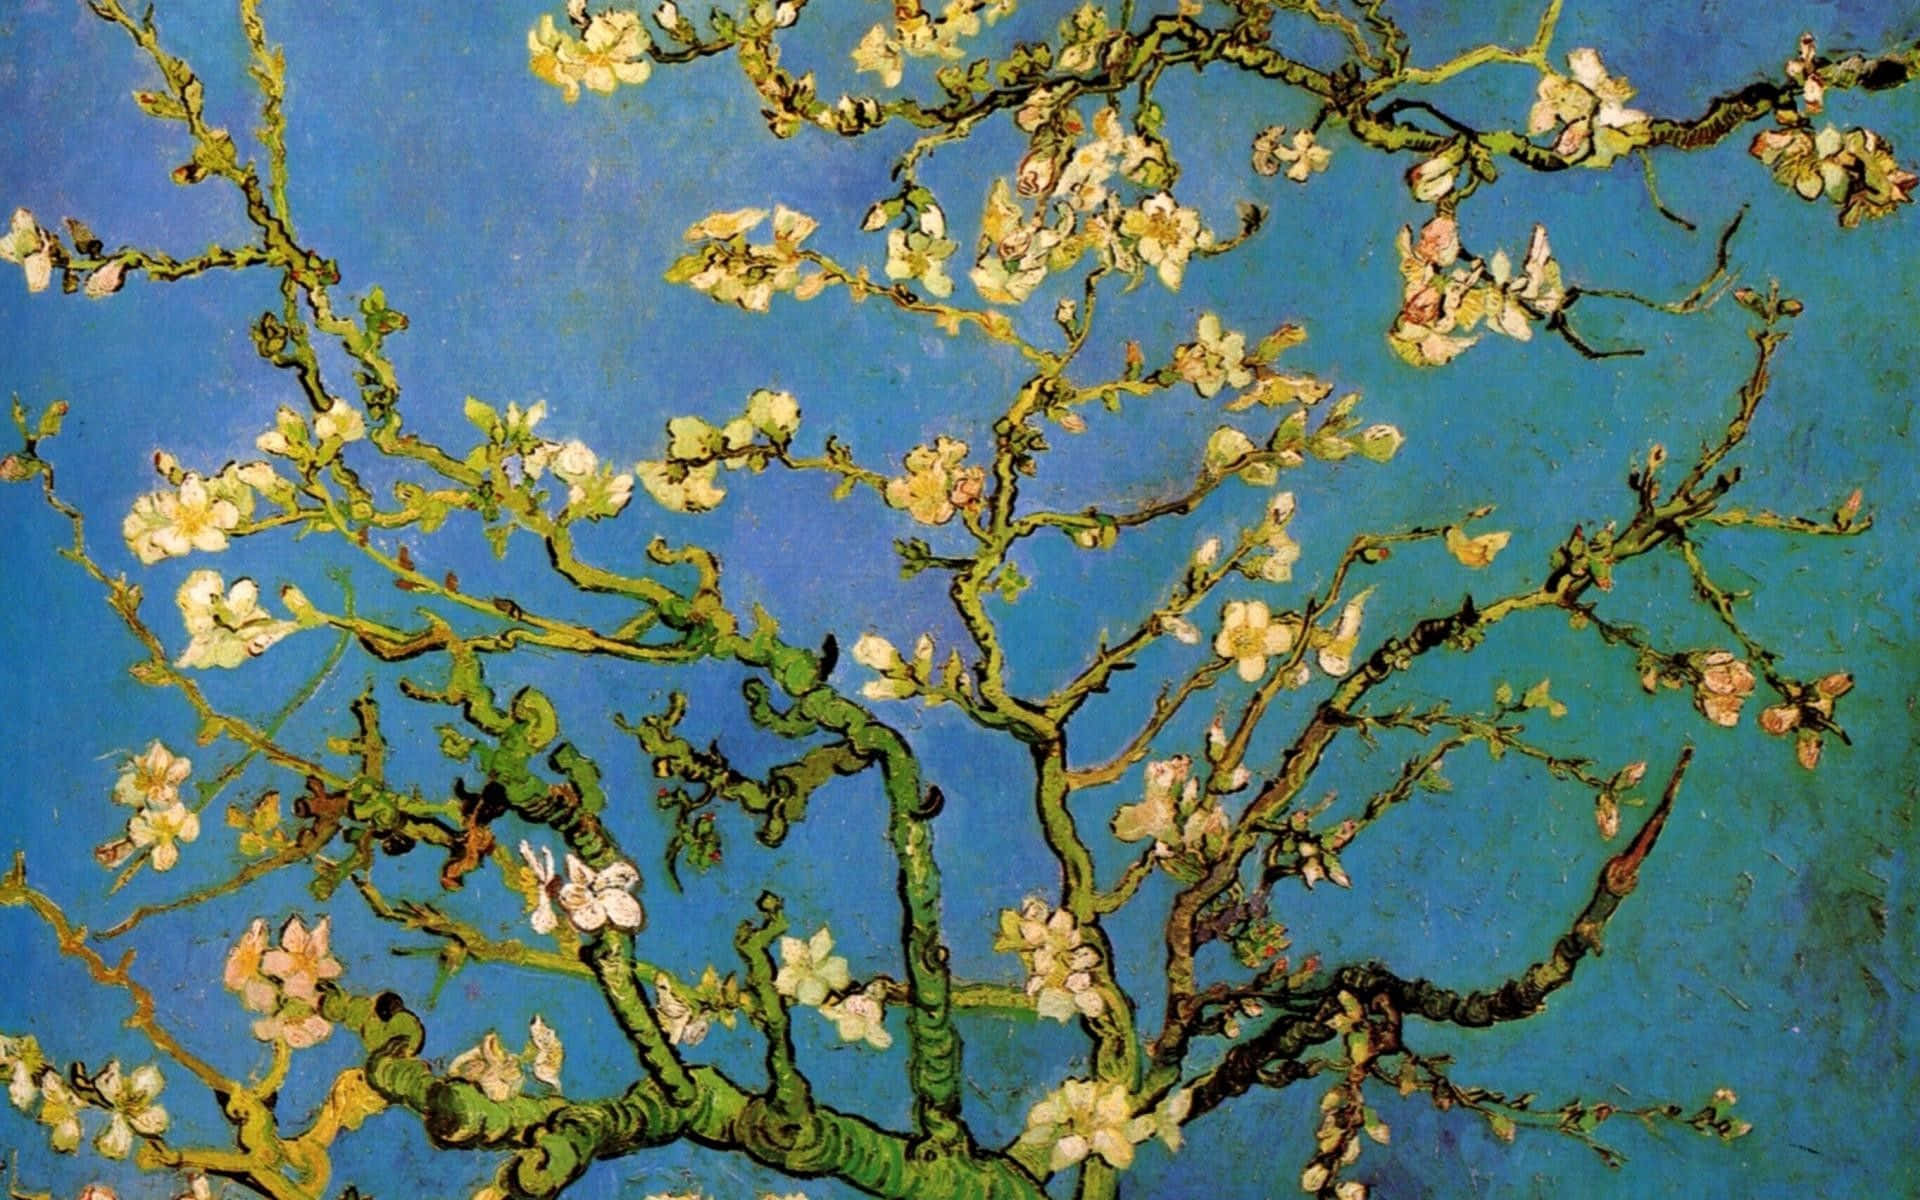 "Almond Blossoms" by the renowned artist Vincent Van Gogh. Wallpaper